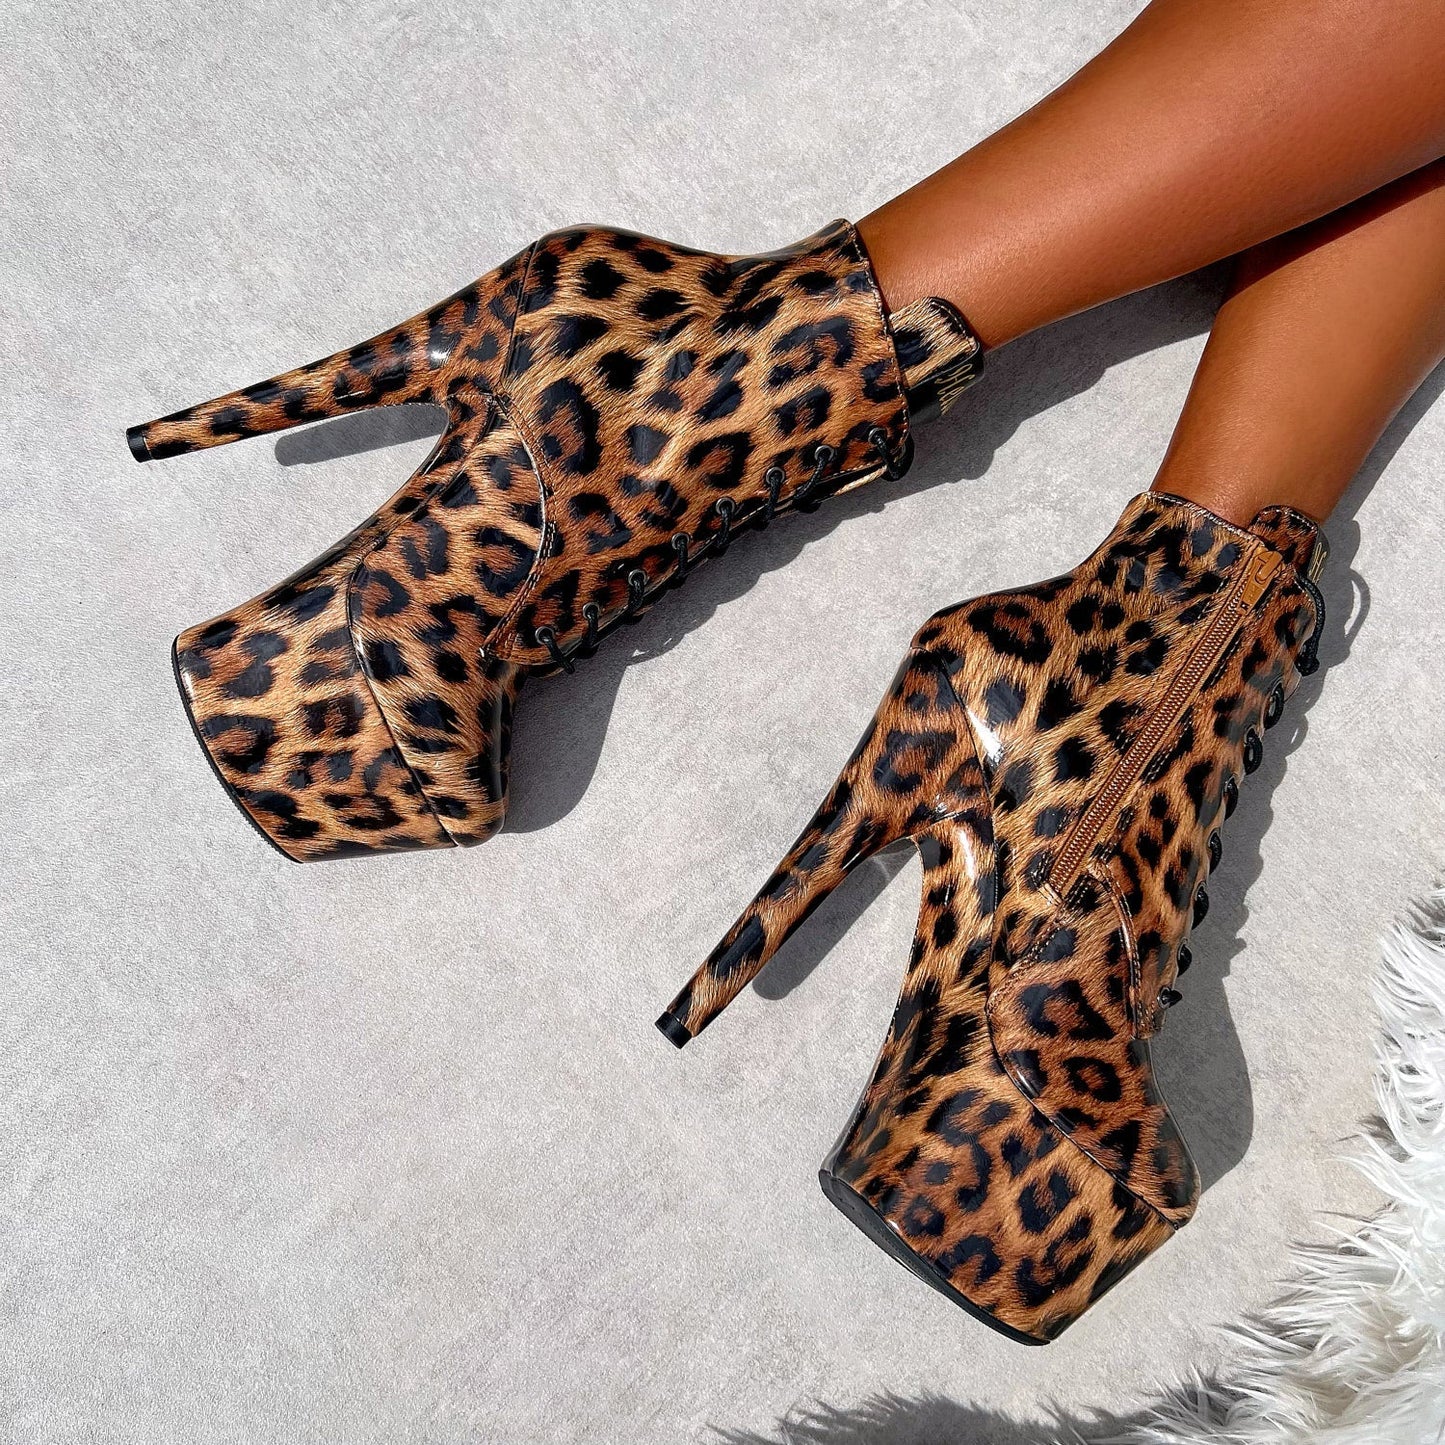 Leopard Ankle Boot - 7 INCH